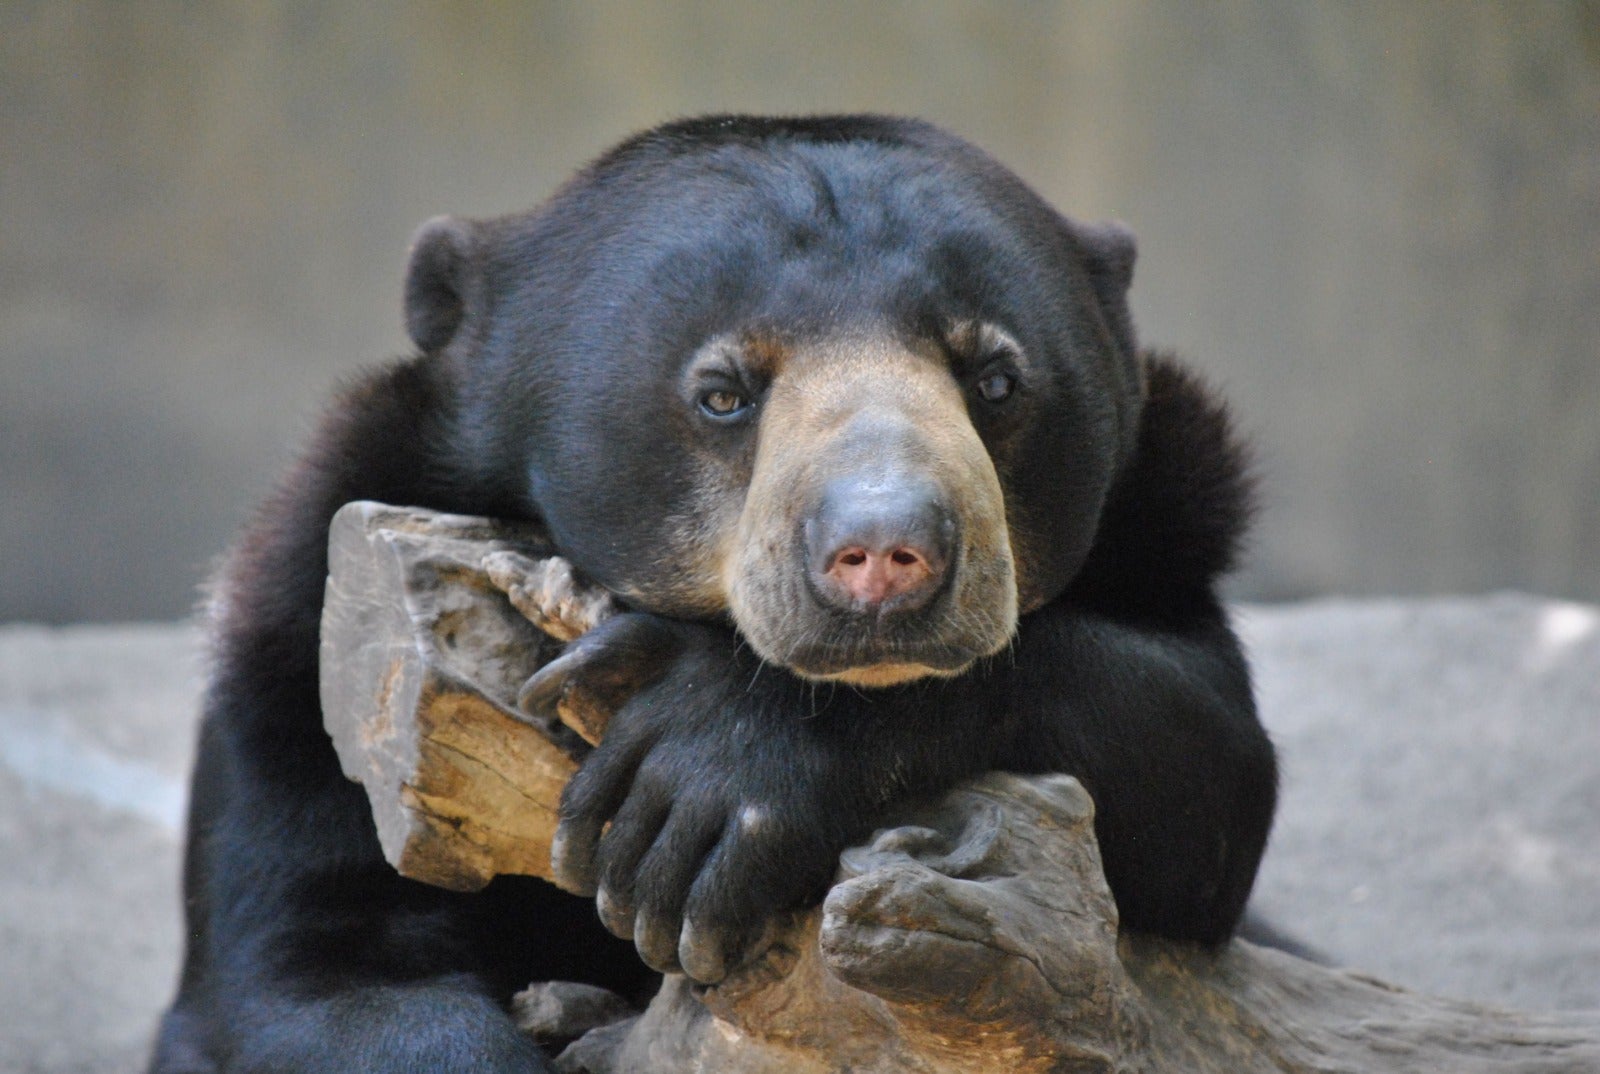 Sunbears Are Being Hunted After China Approves Its Bile As Covid-19 Cure - WORLD OF BUZZ